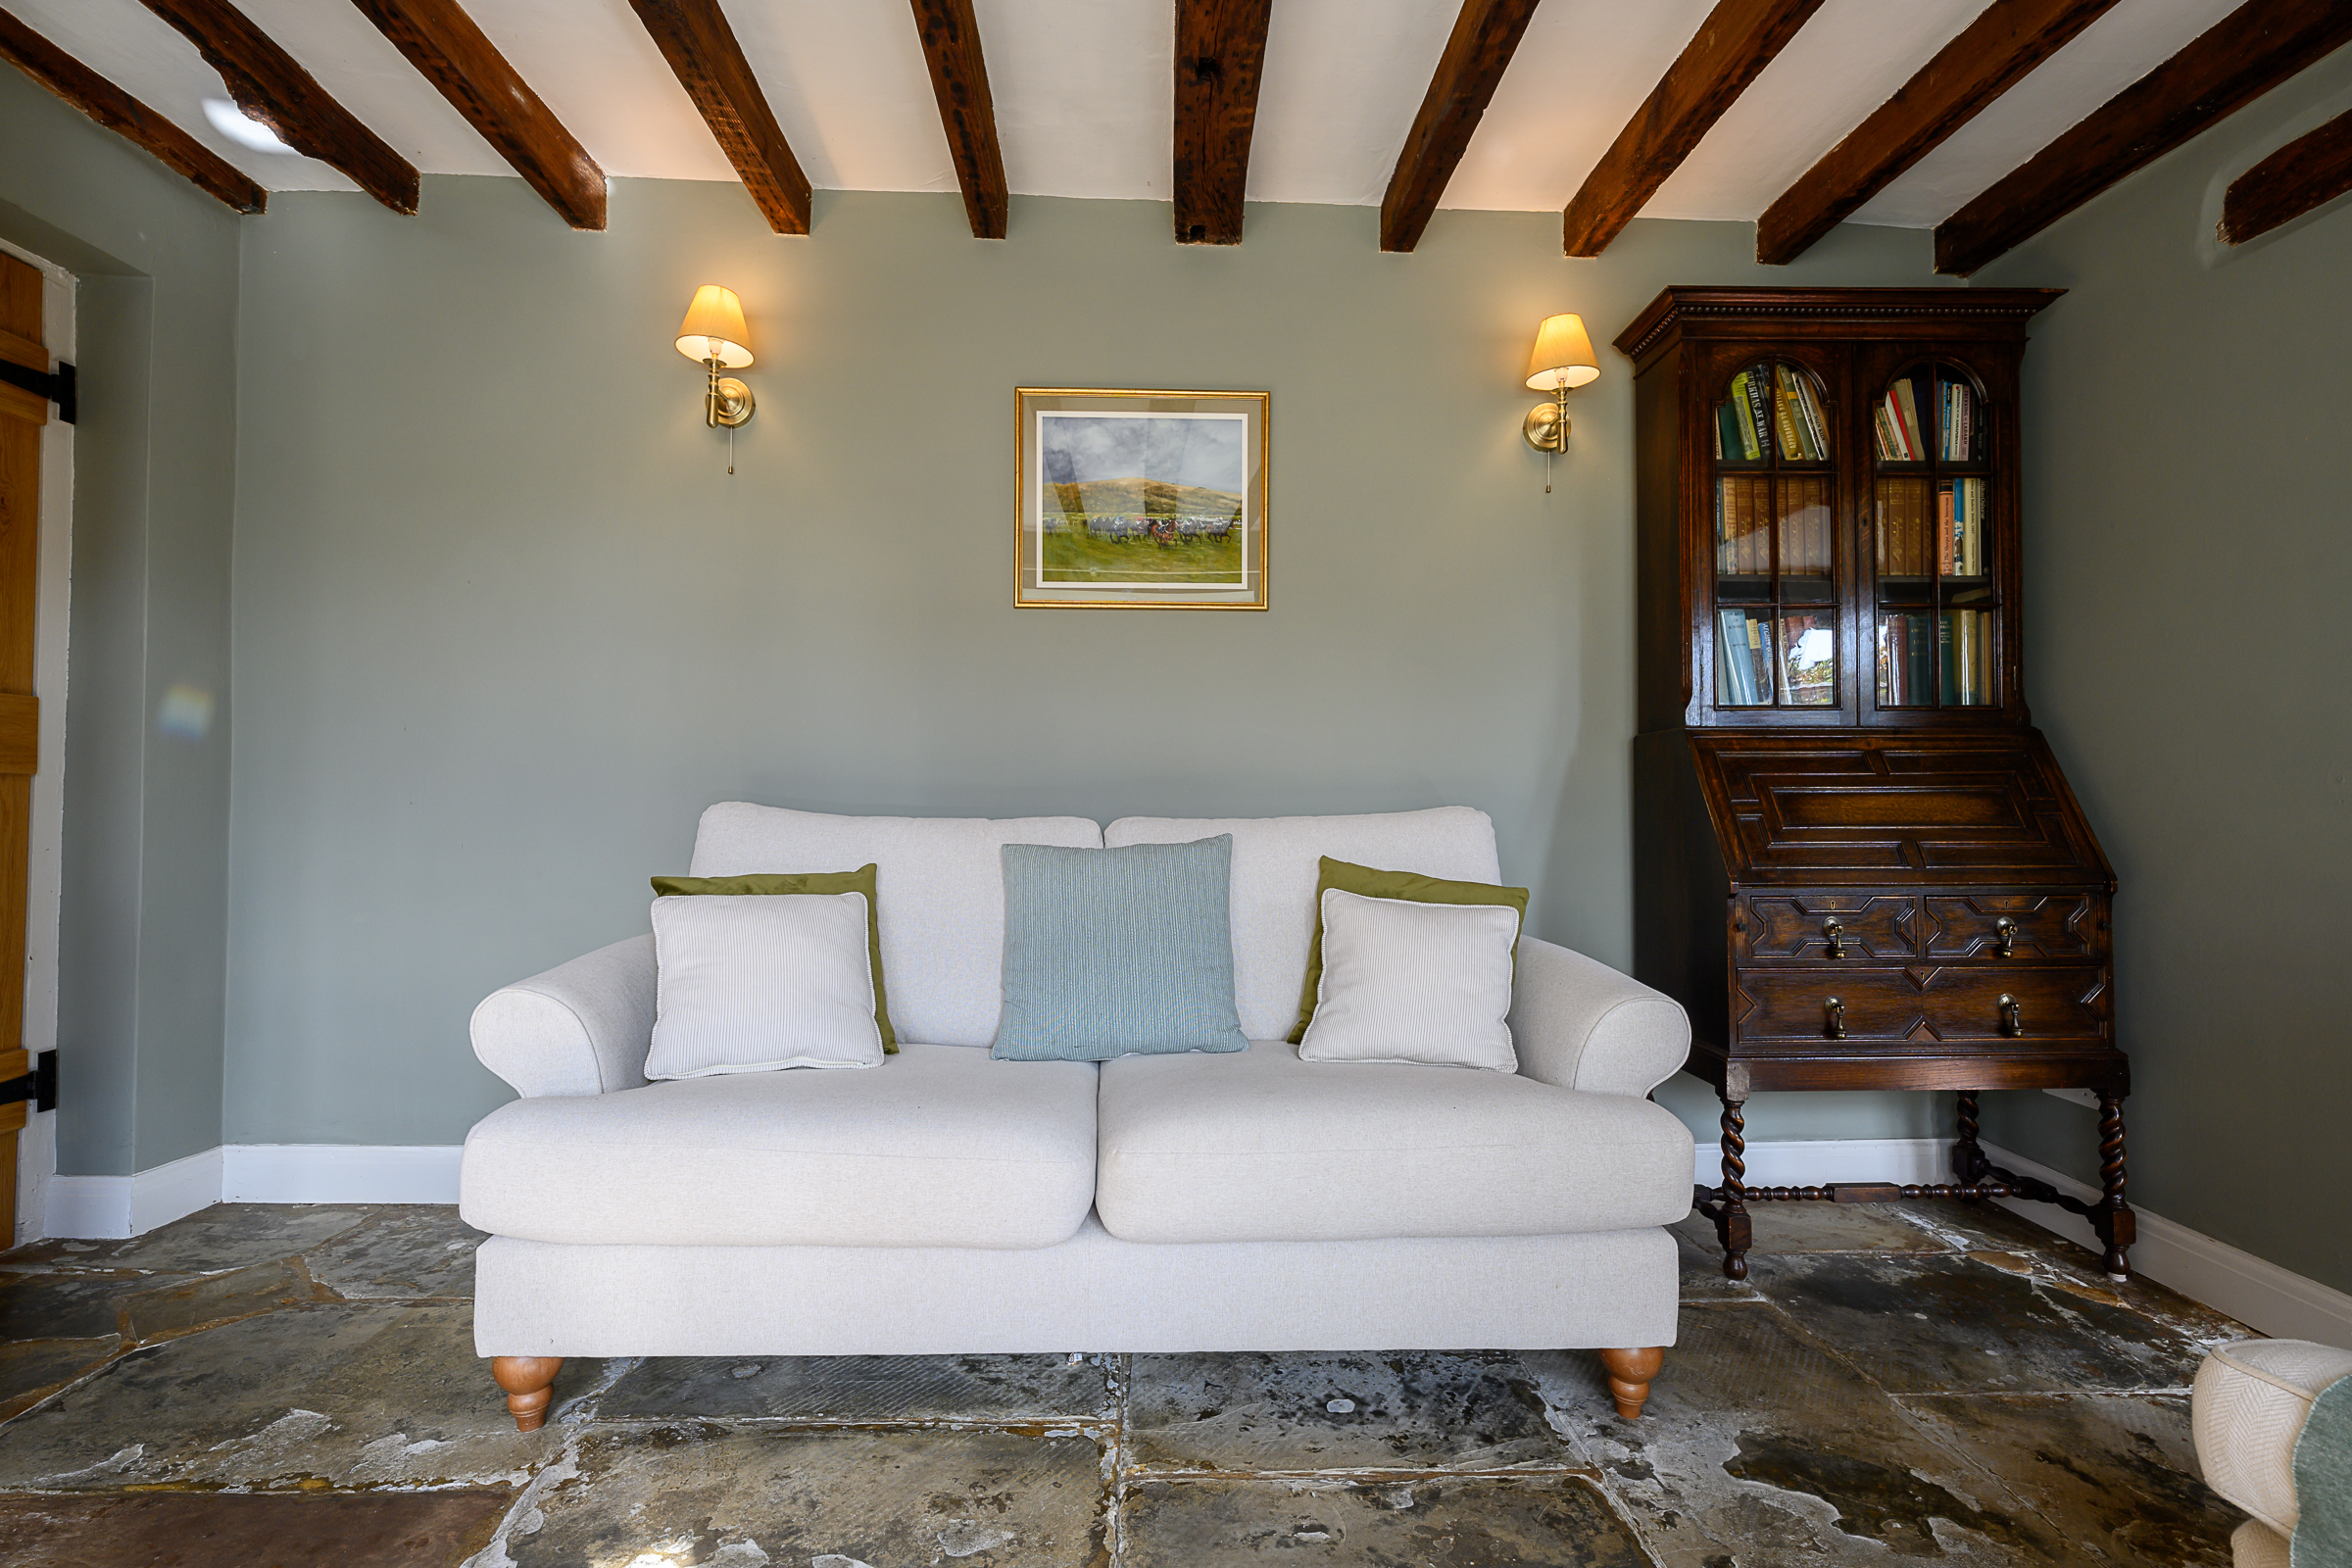 Southcroft Cottage, Bredon Hill Cottage, The Cotswolds, Sleeps 5 photography by one man and his camera